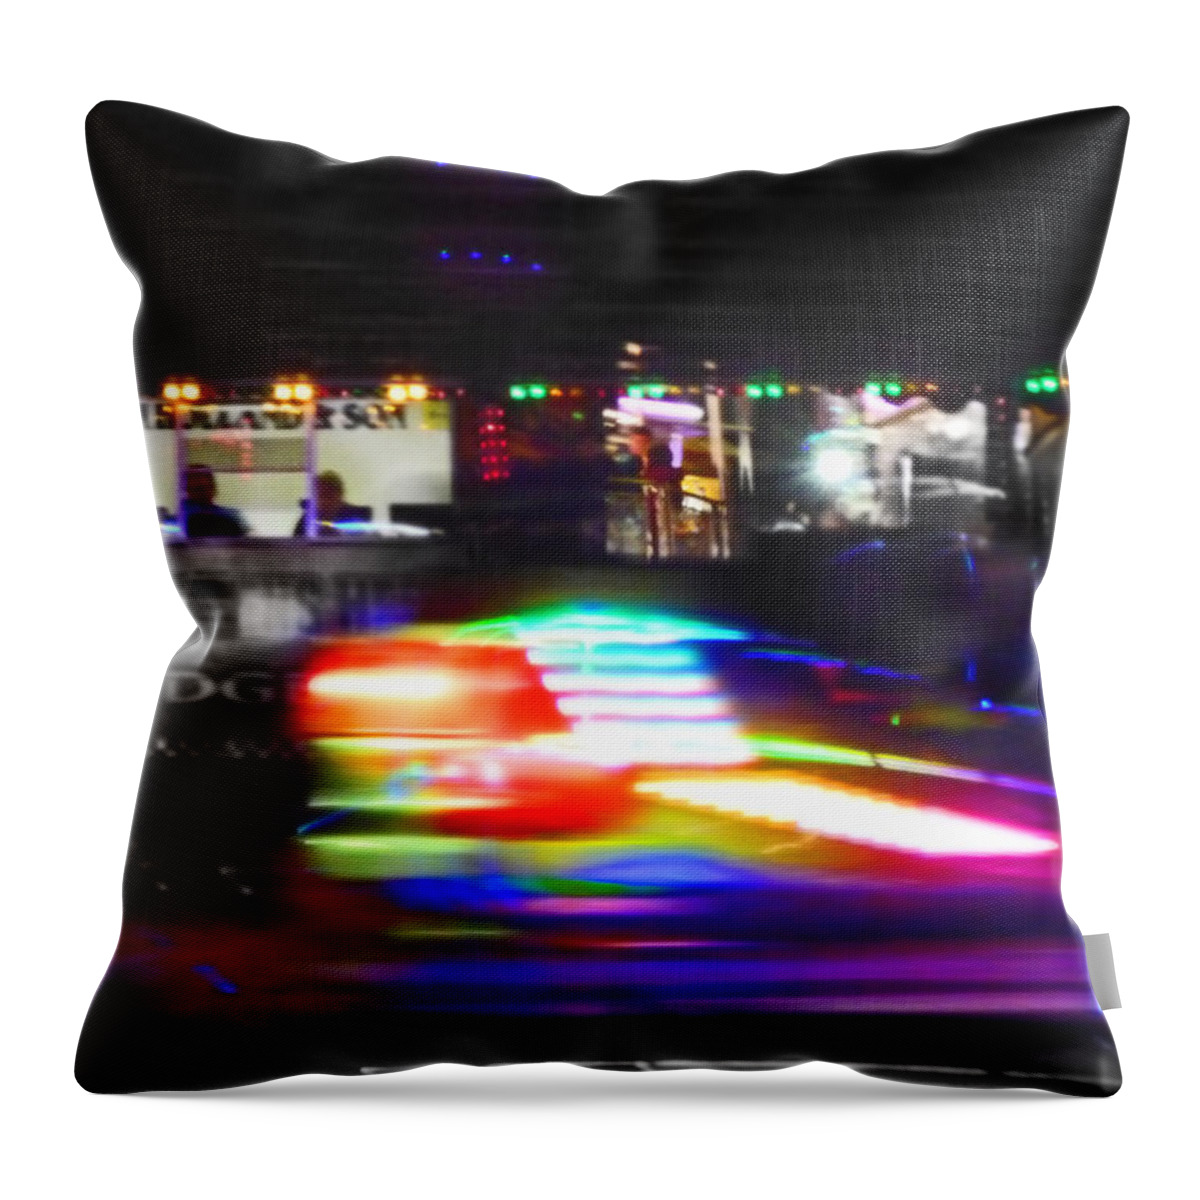 Dodgem Throw Pillow featuring the photograph Super Dodge by Charles Stuart